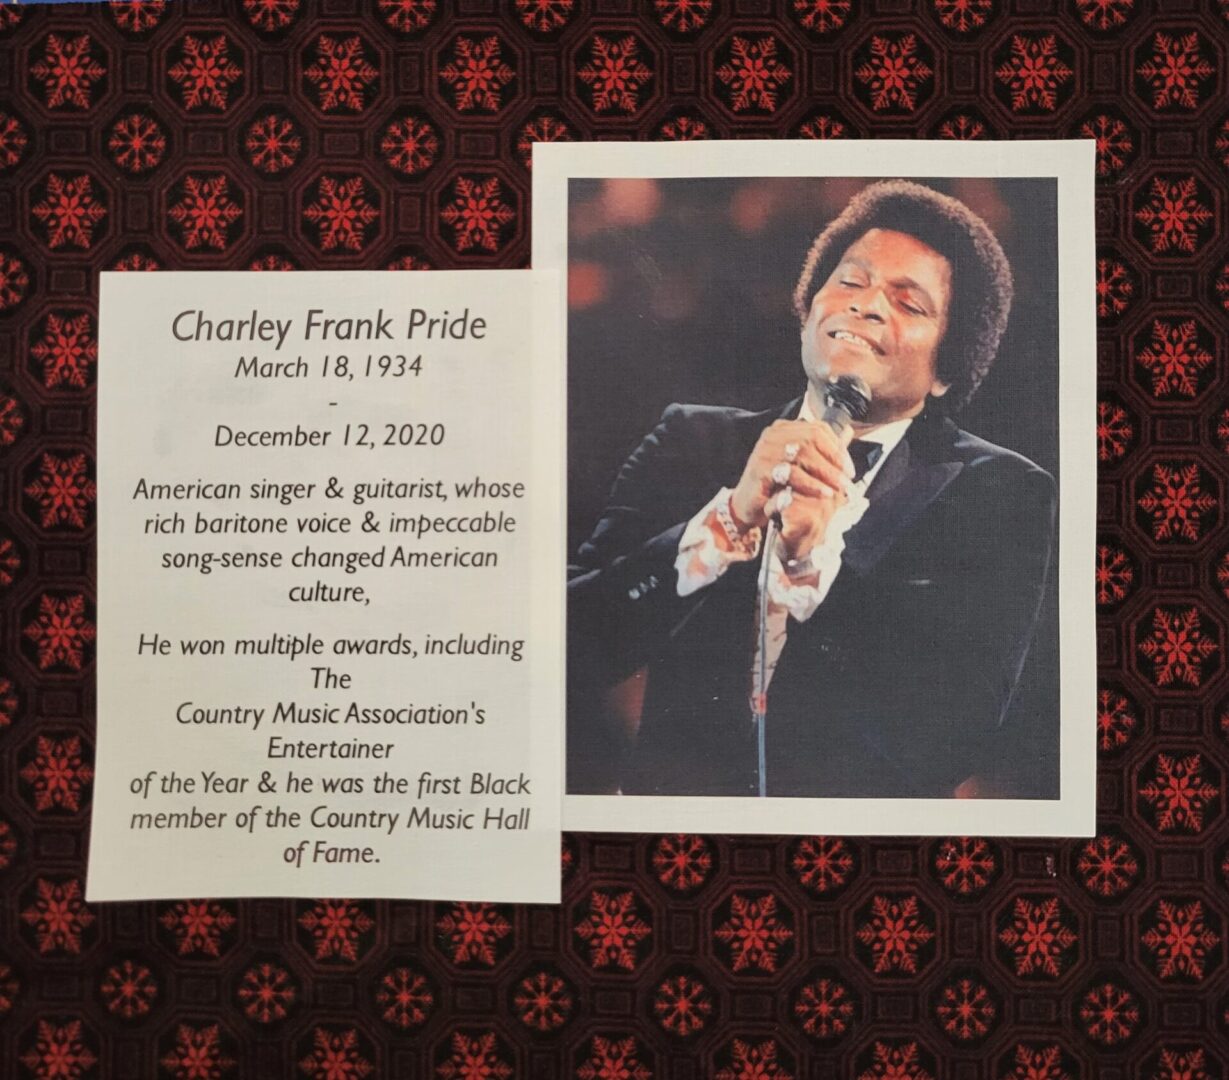 IN MEMORY OF CHARLEY PRIDE - MARCH 18, 1934 - DECEMBER 12, 2020